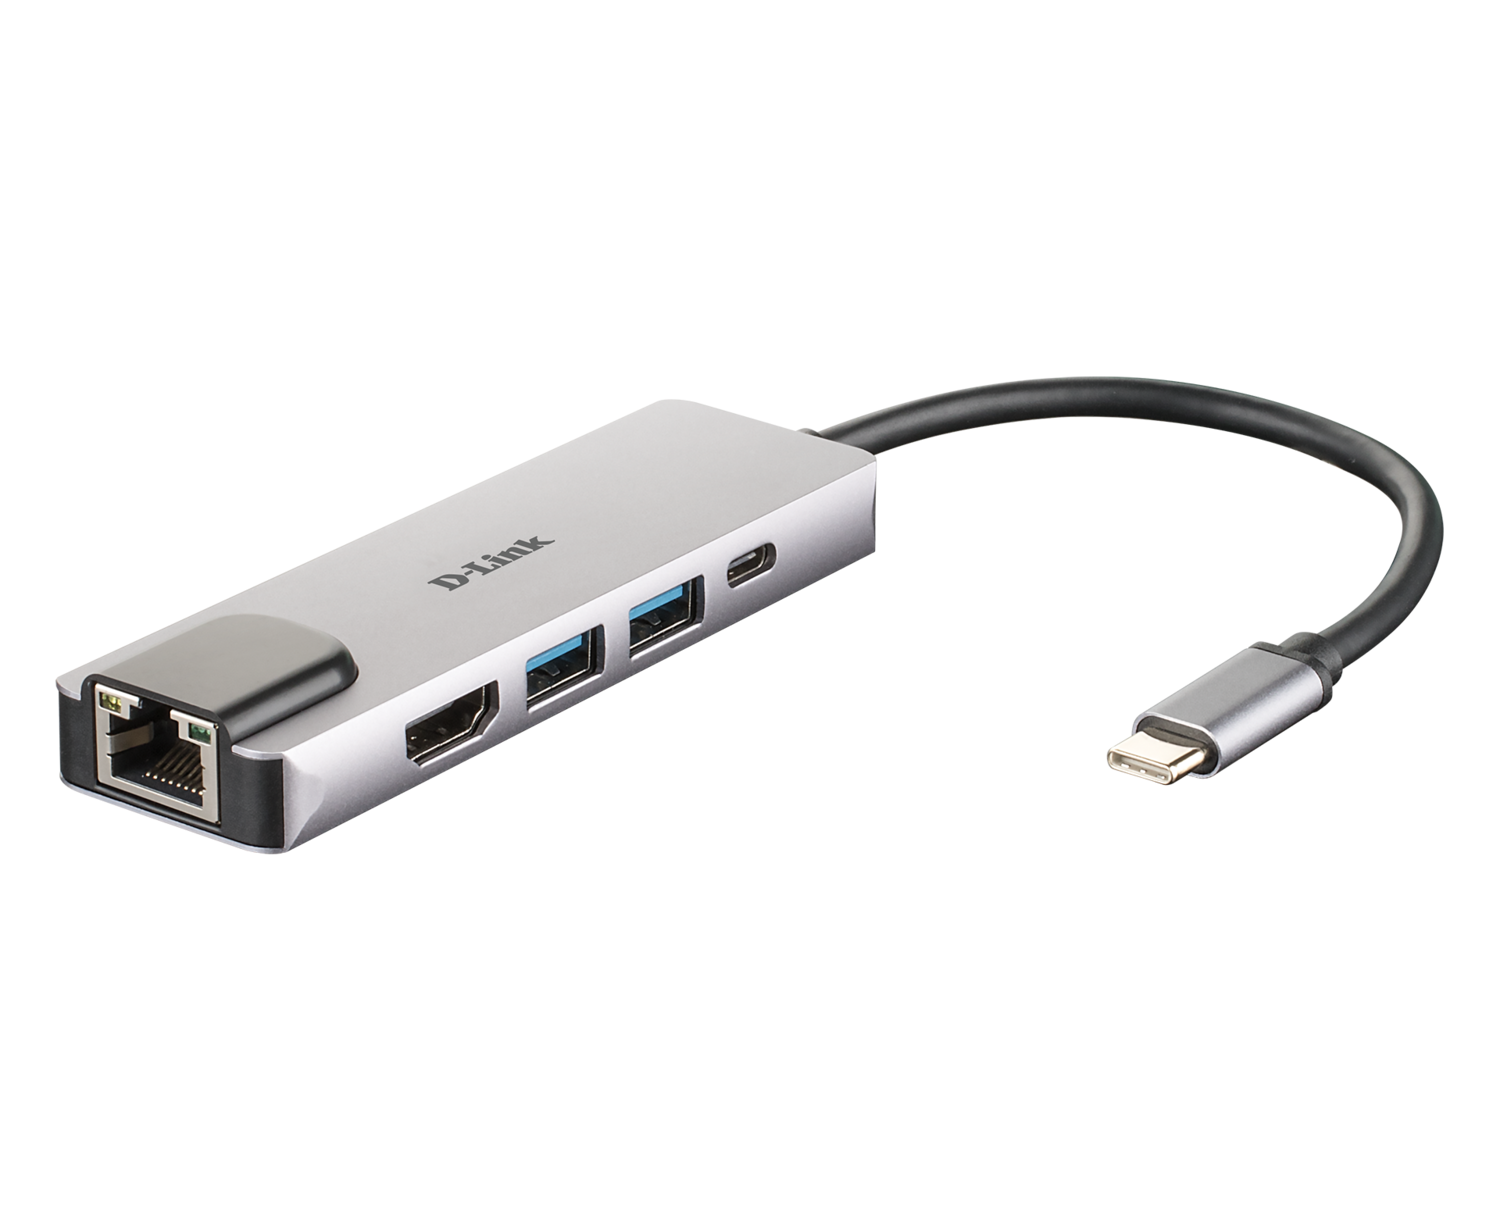 D-Link 5-in-1 USB-C™ Hub with HDMI/Ethernet and Power Delivery
DUB-M520